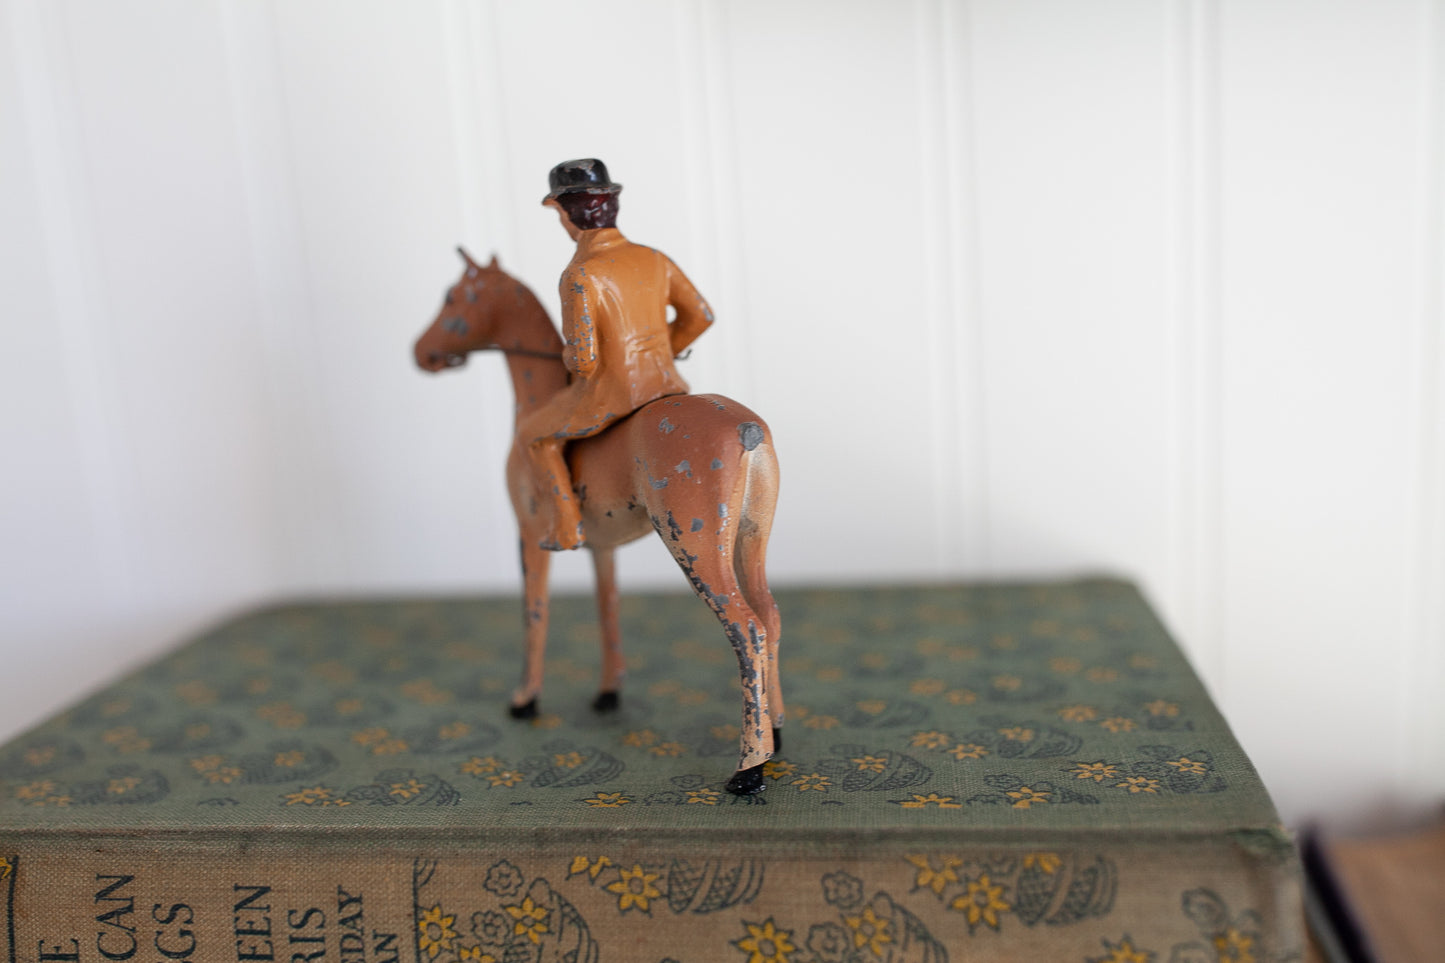 Vintage  Cast Iron Lead Painted Horse &Jockey Childs Play Toy Figure - 3.5" tall